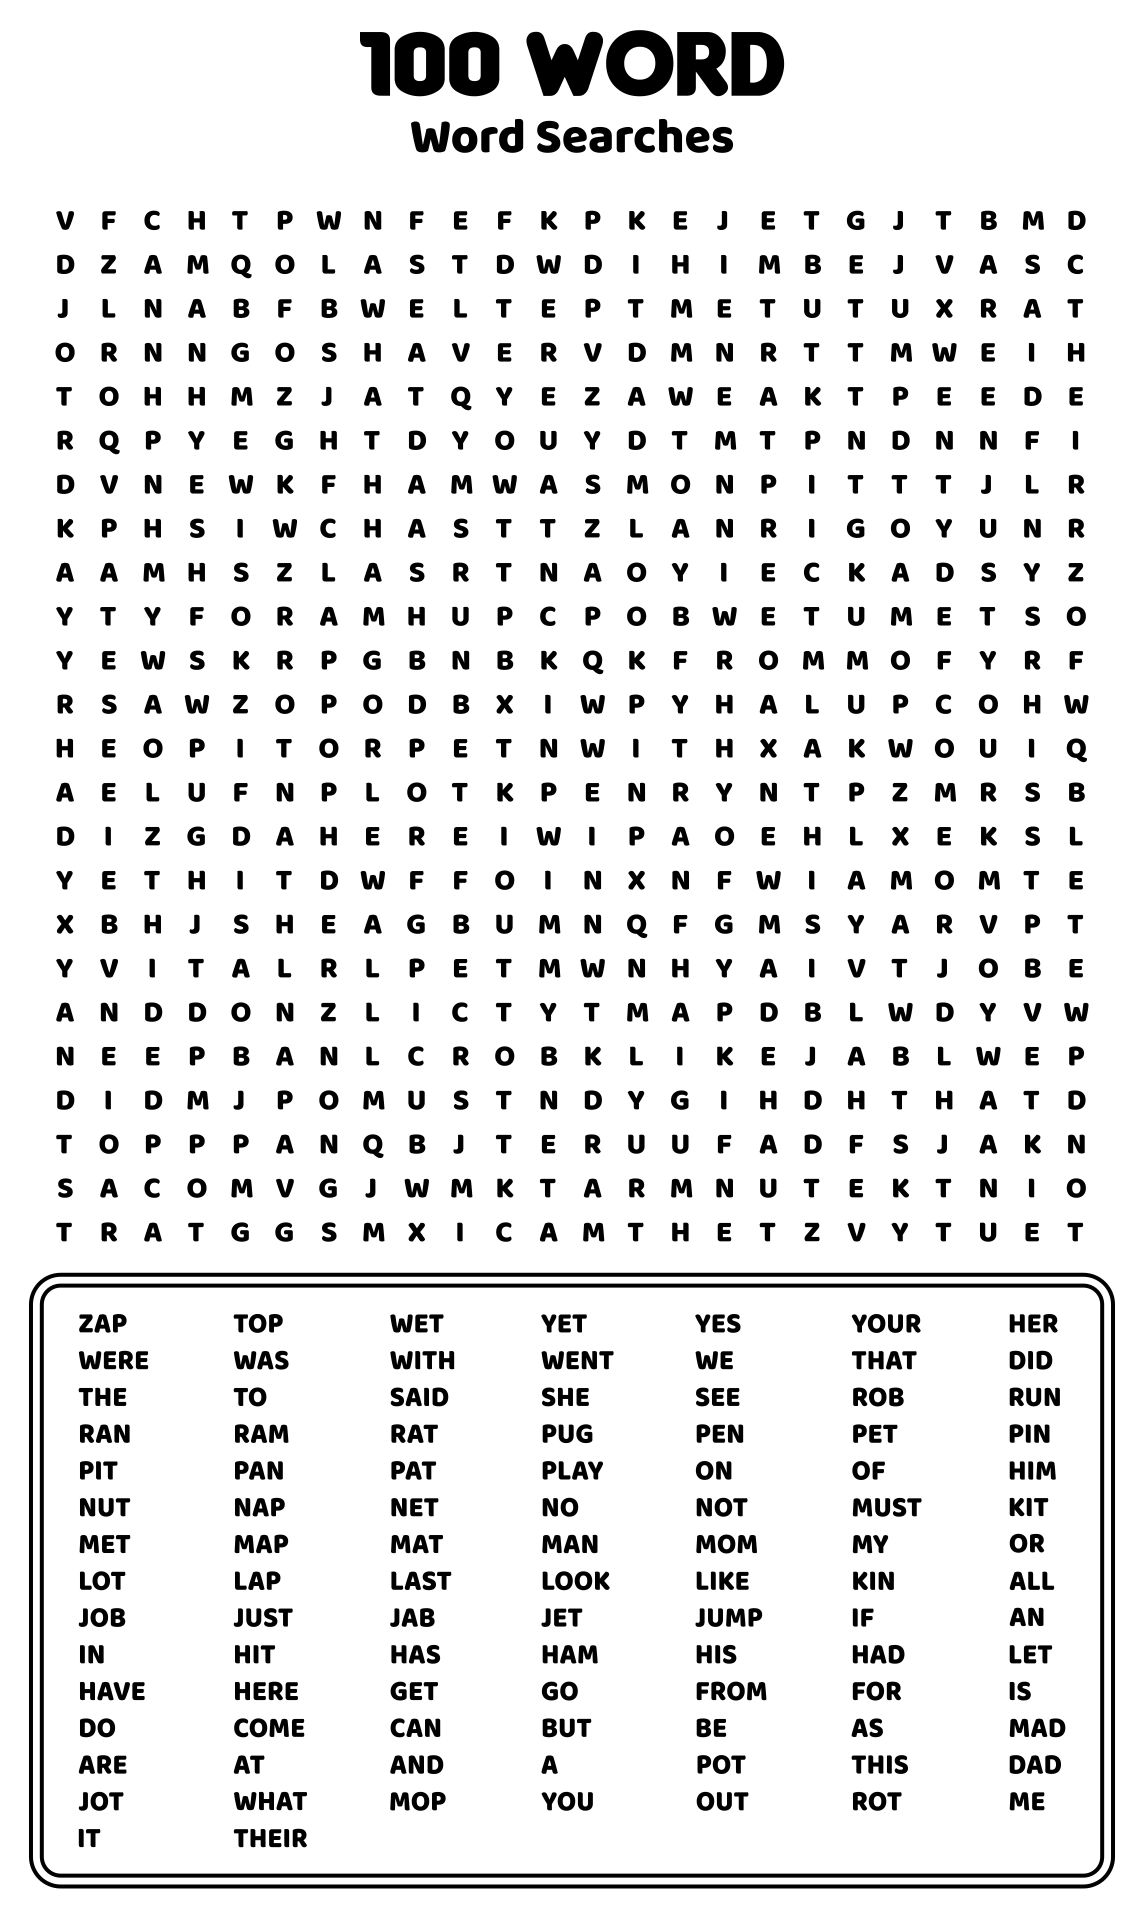 100 Word Word Search Printable Get Your Hands on Amazing Free Printables!